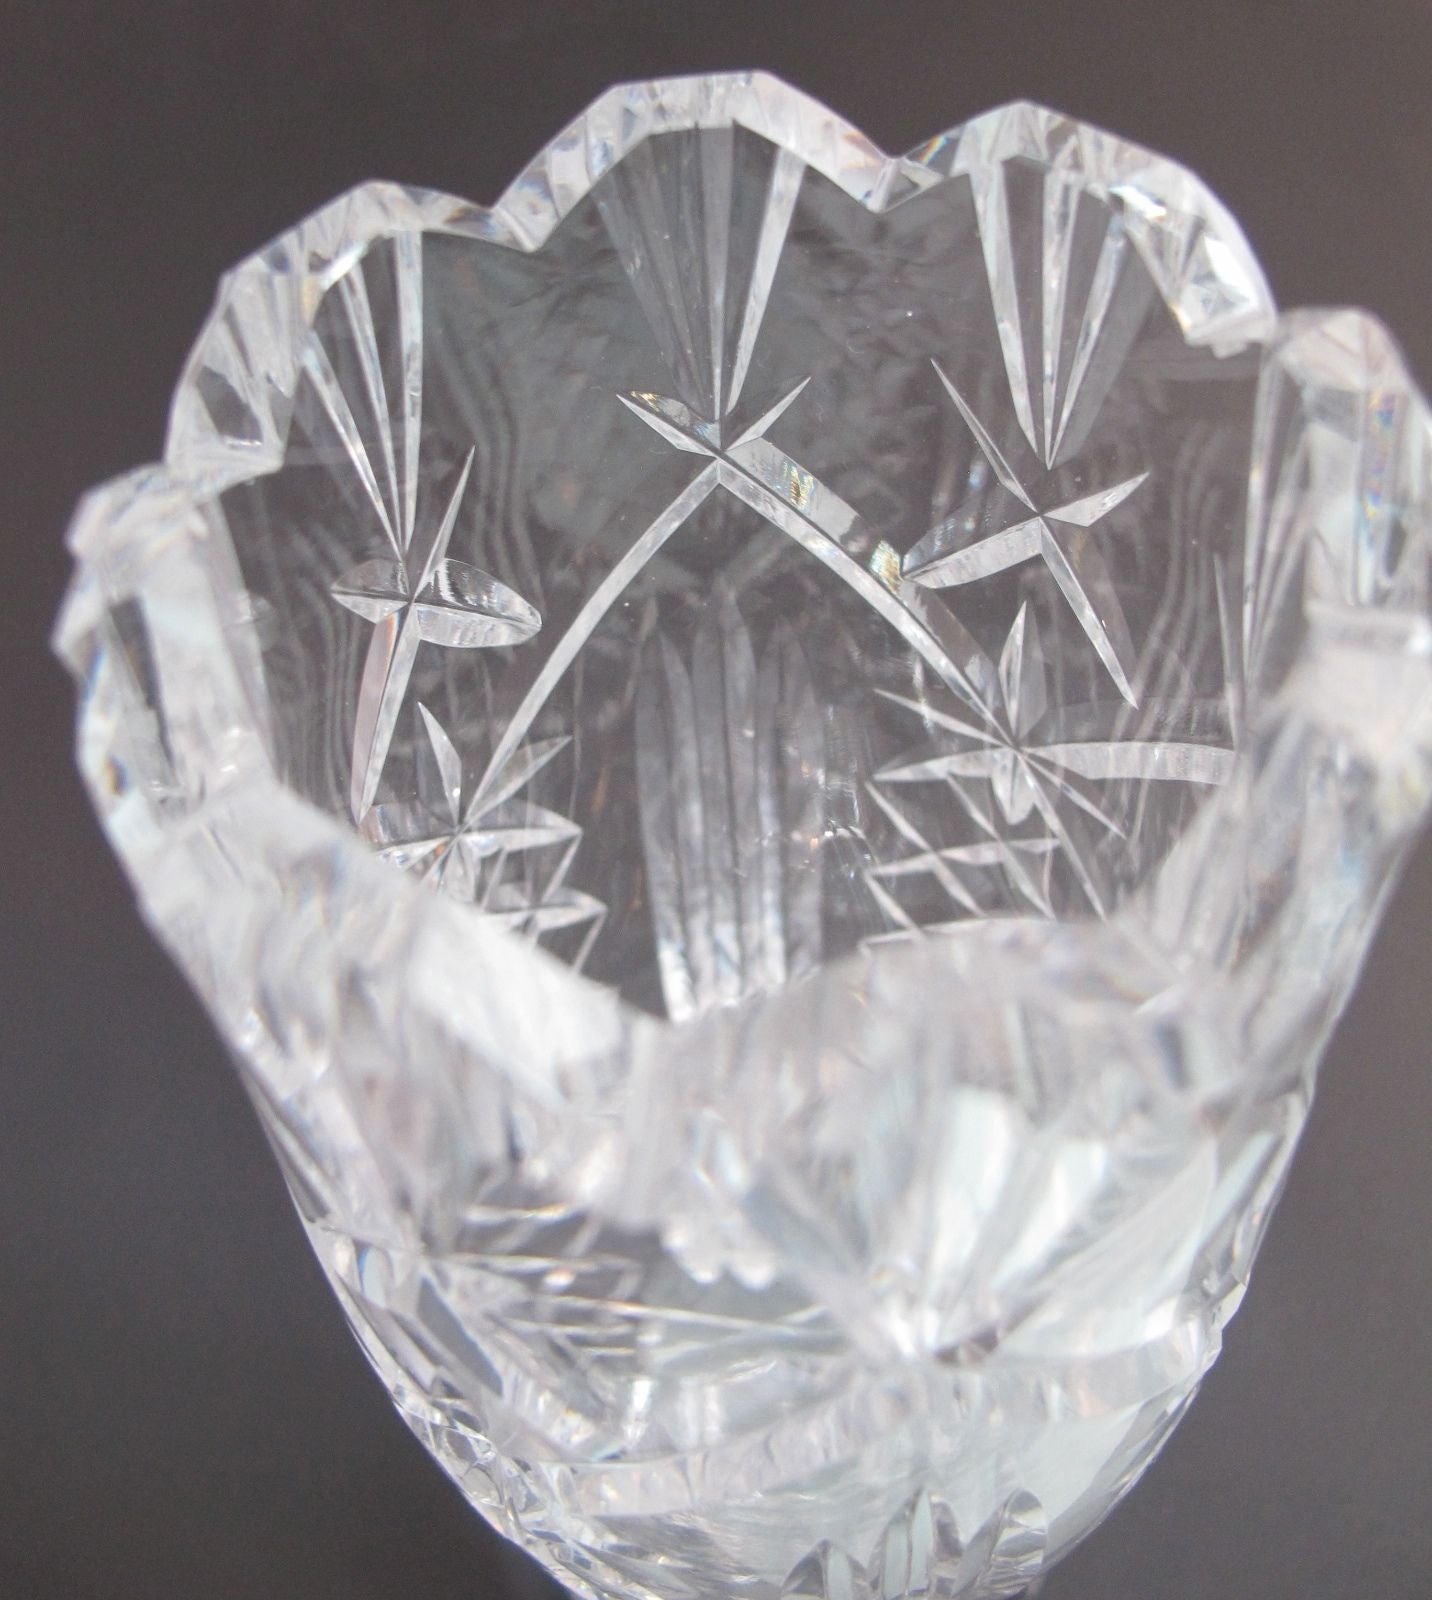 Waterford CUT GLASS  signed vase  footed old cut in Ireland - O'Rourke crystal awards & gifts abp cut glass